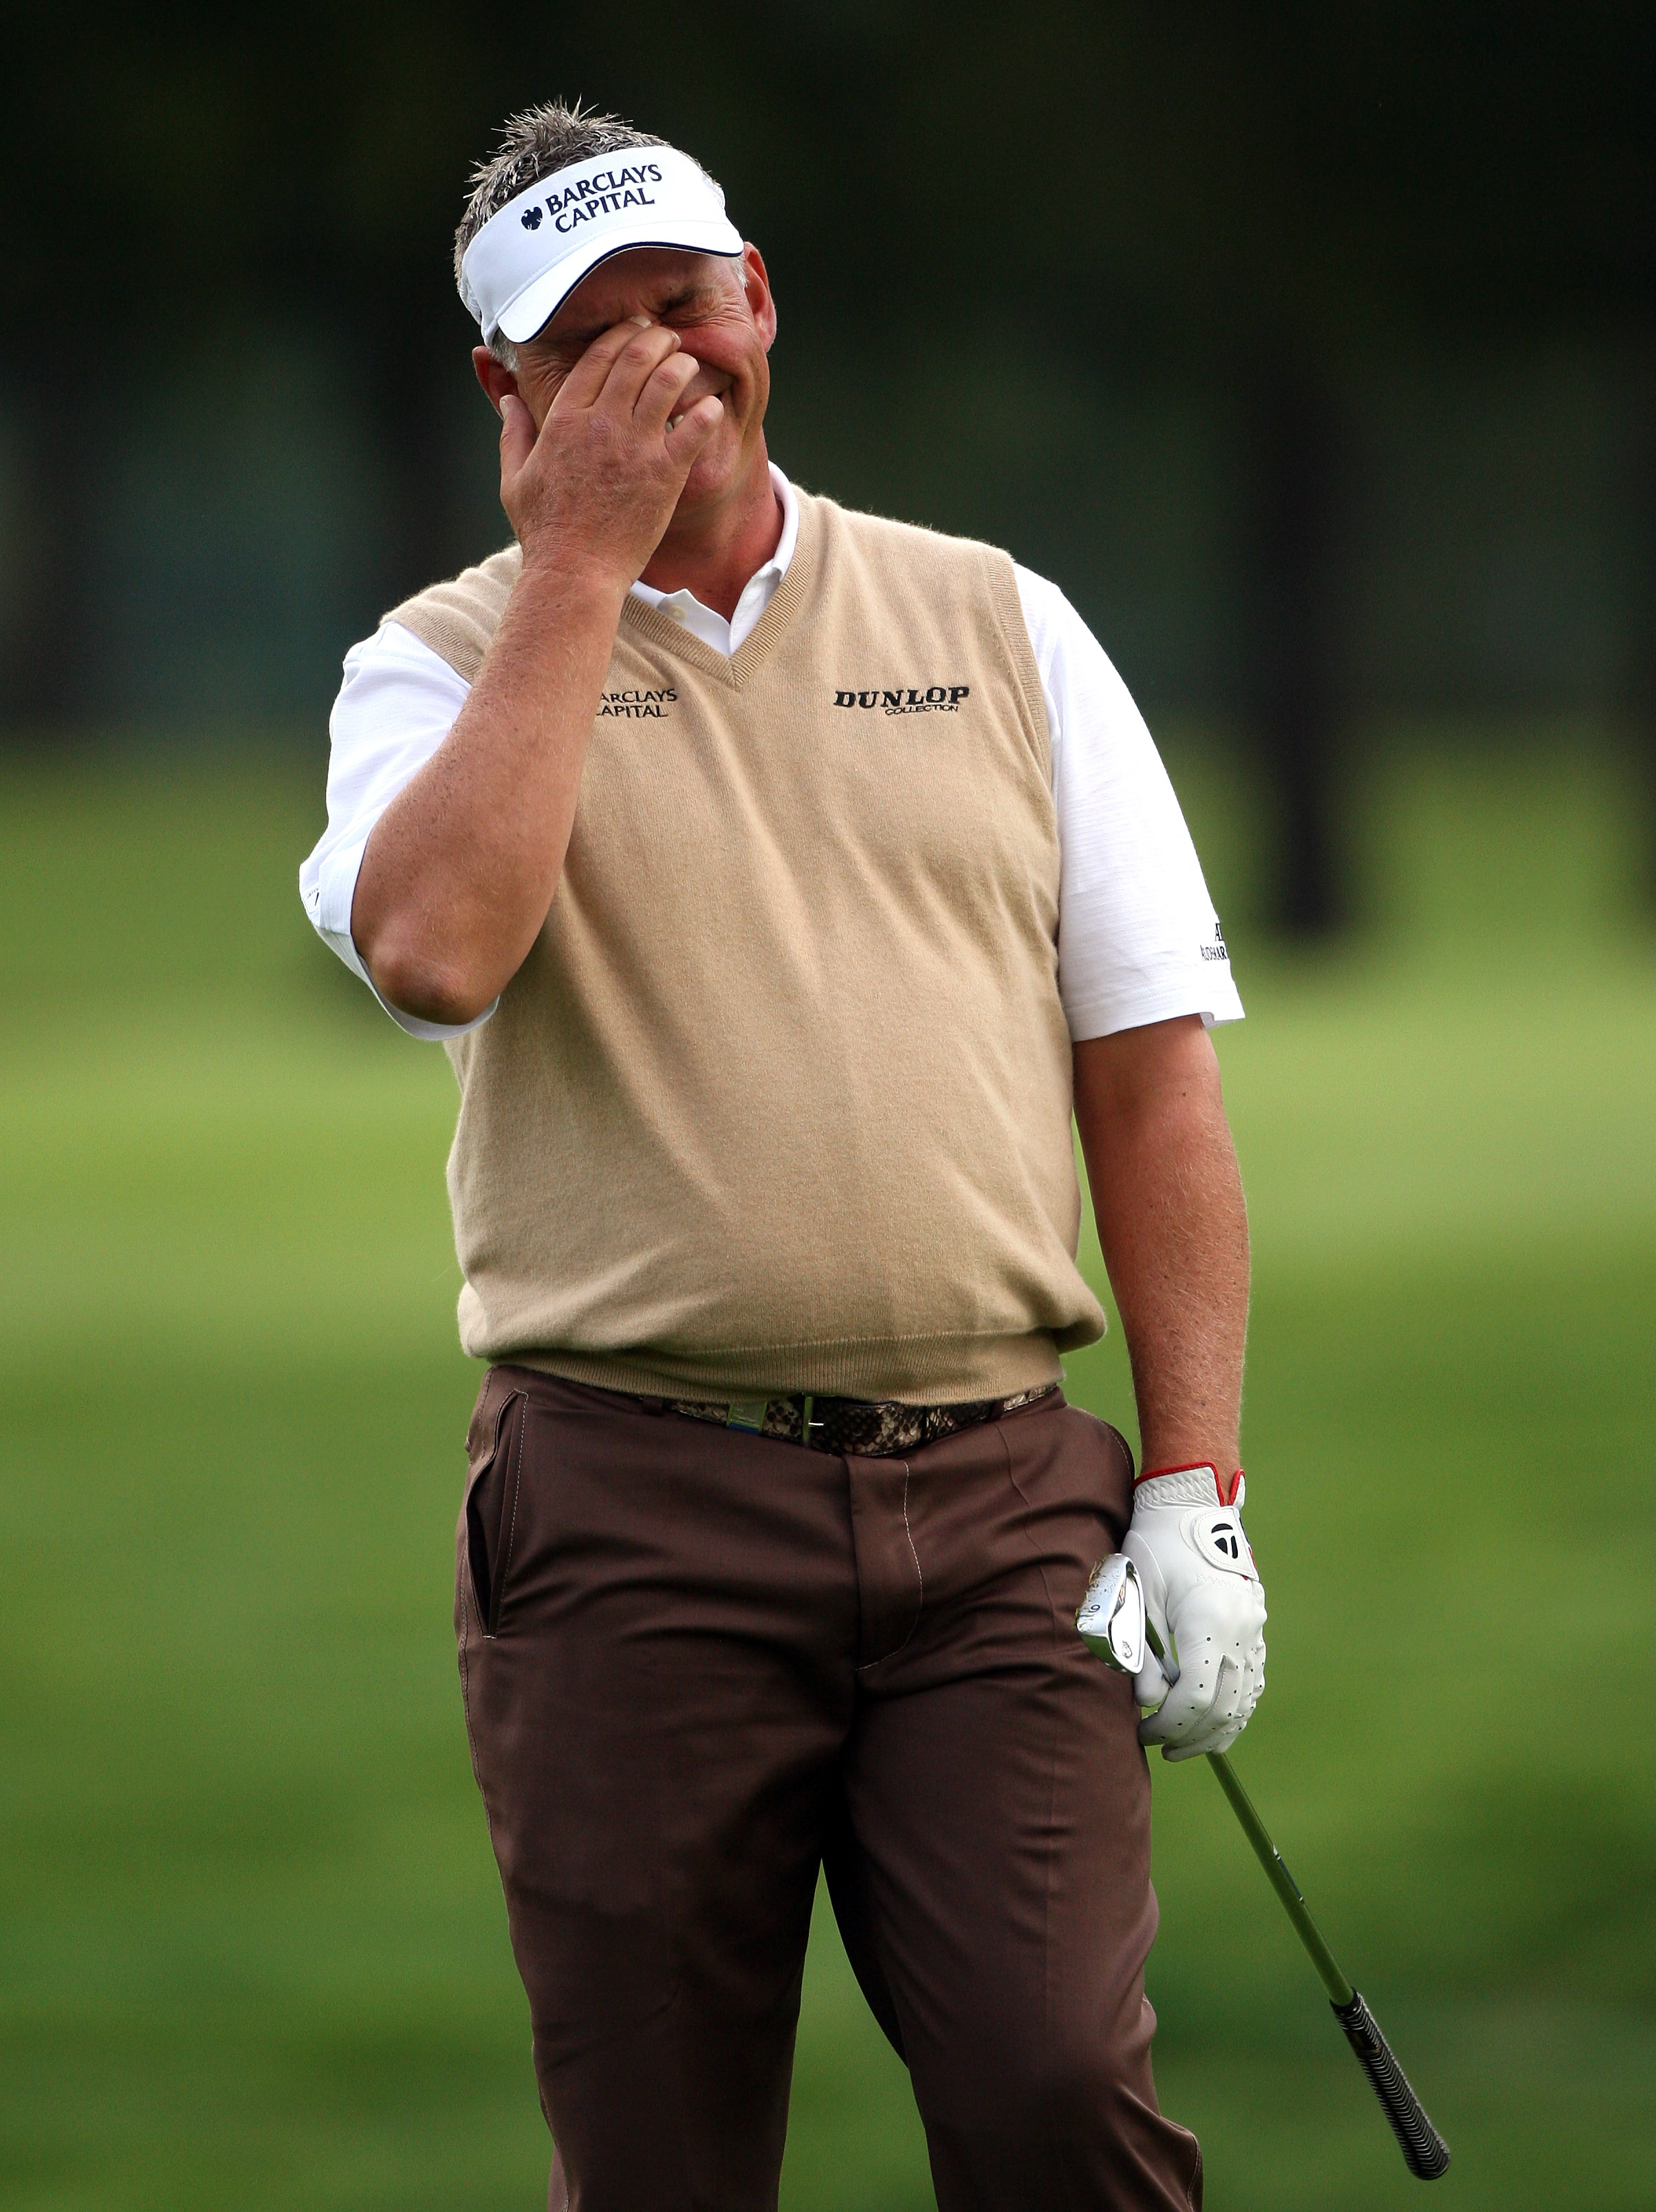 CRANS, SWITZERLAND - SEPTEMBER 03:  Darren Clarke of Northern Ireland shows his frustration after his second shot on the 12th hole during the first round of The Omega European Masters at Crans-Sur-Sierre Golf Club on September 3, 2009 in Crans Montana, Sw